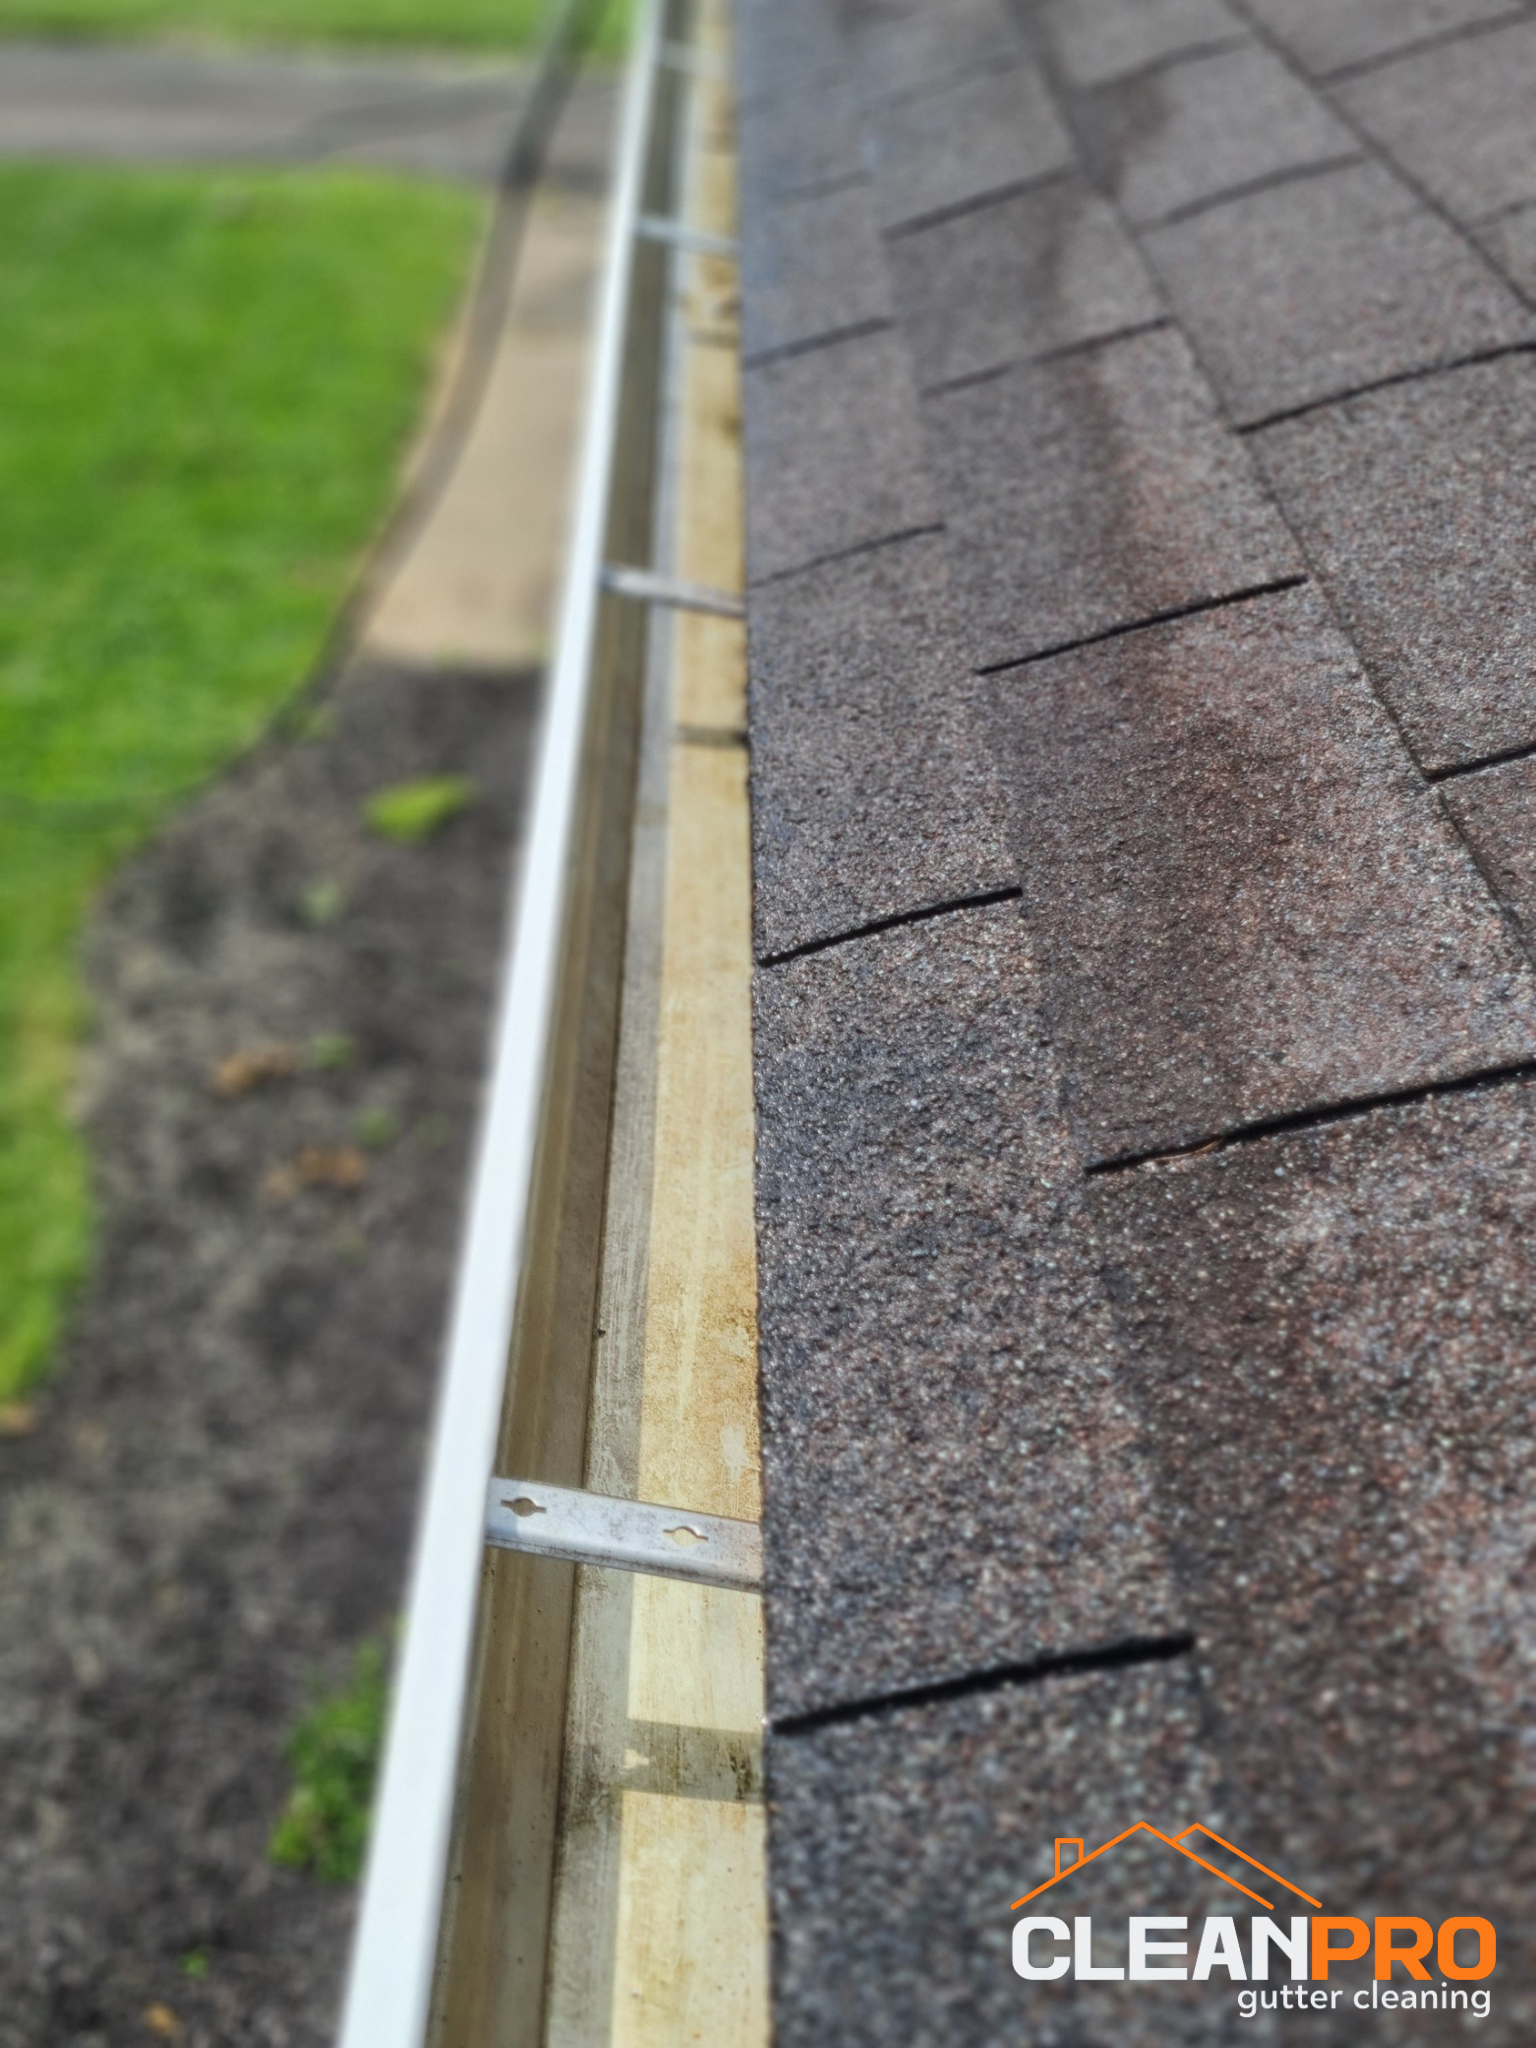 Quality Gutter Cleaning in Newport News VA